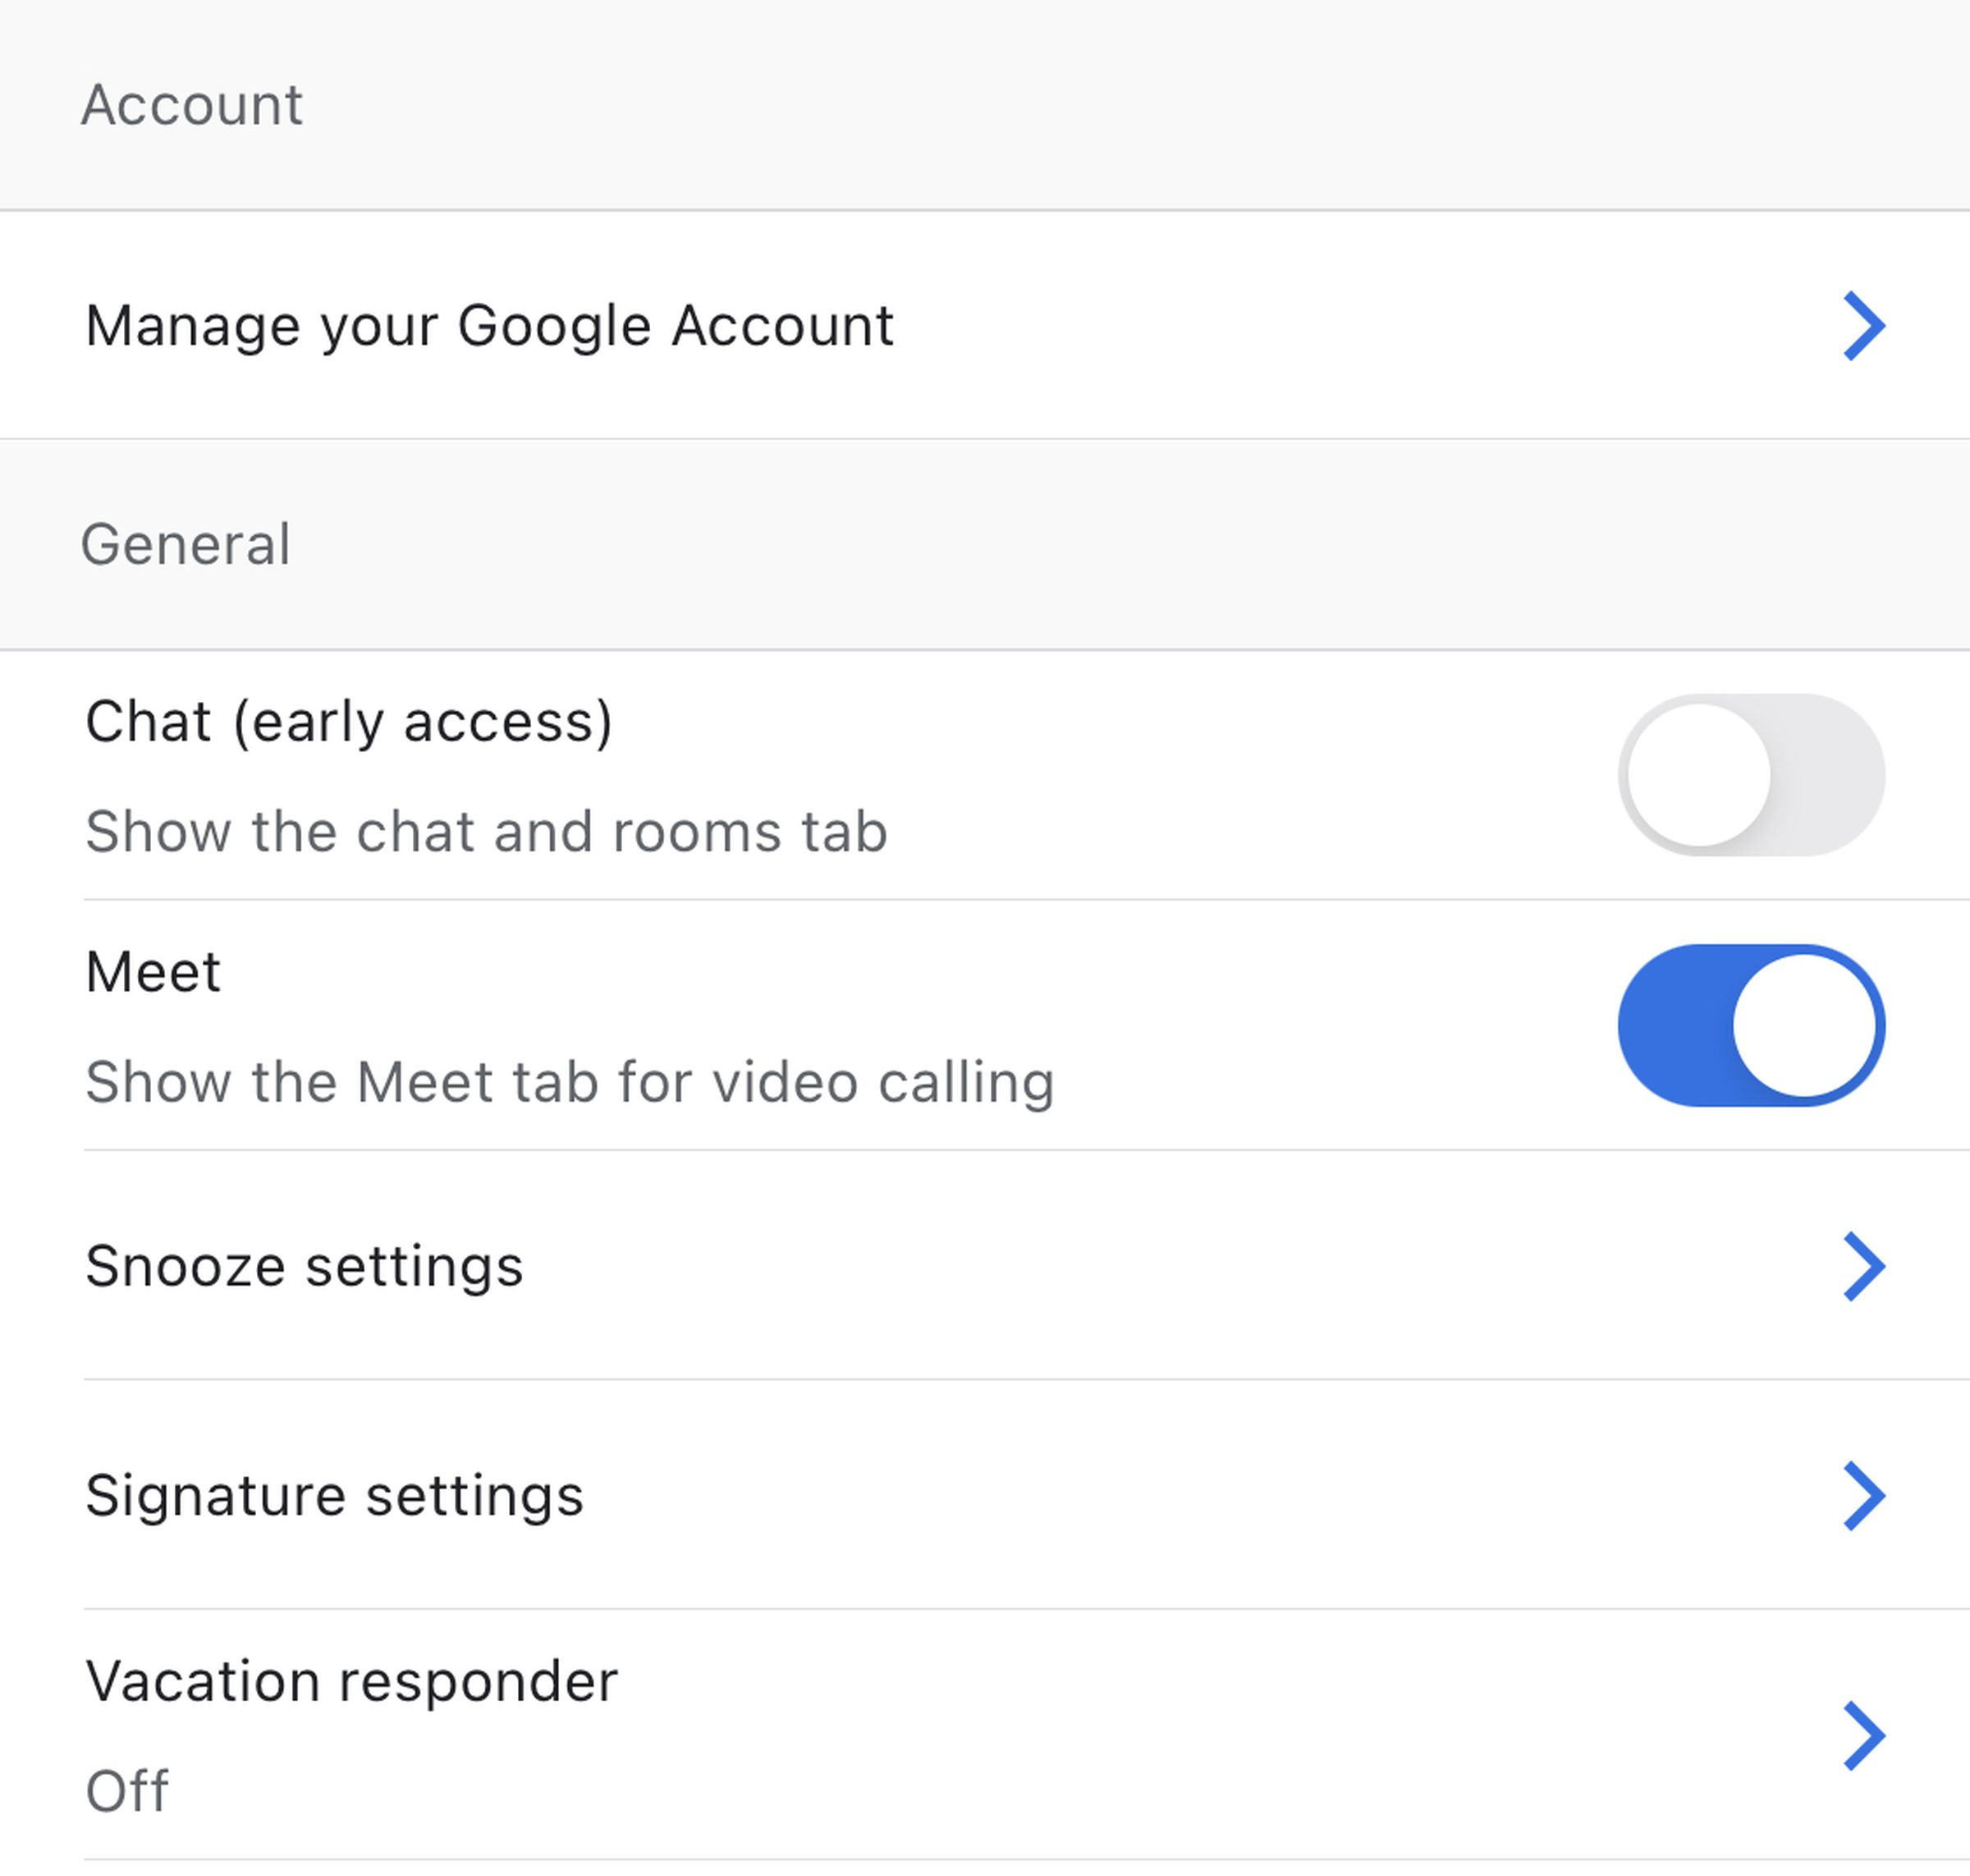 Turning on the Chat toggle will give you access to personal and group chats in Gmail.